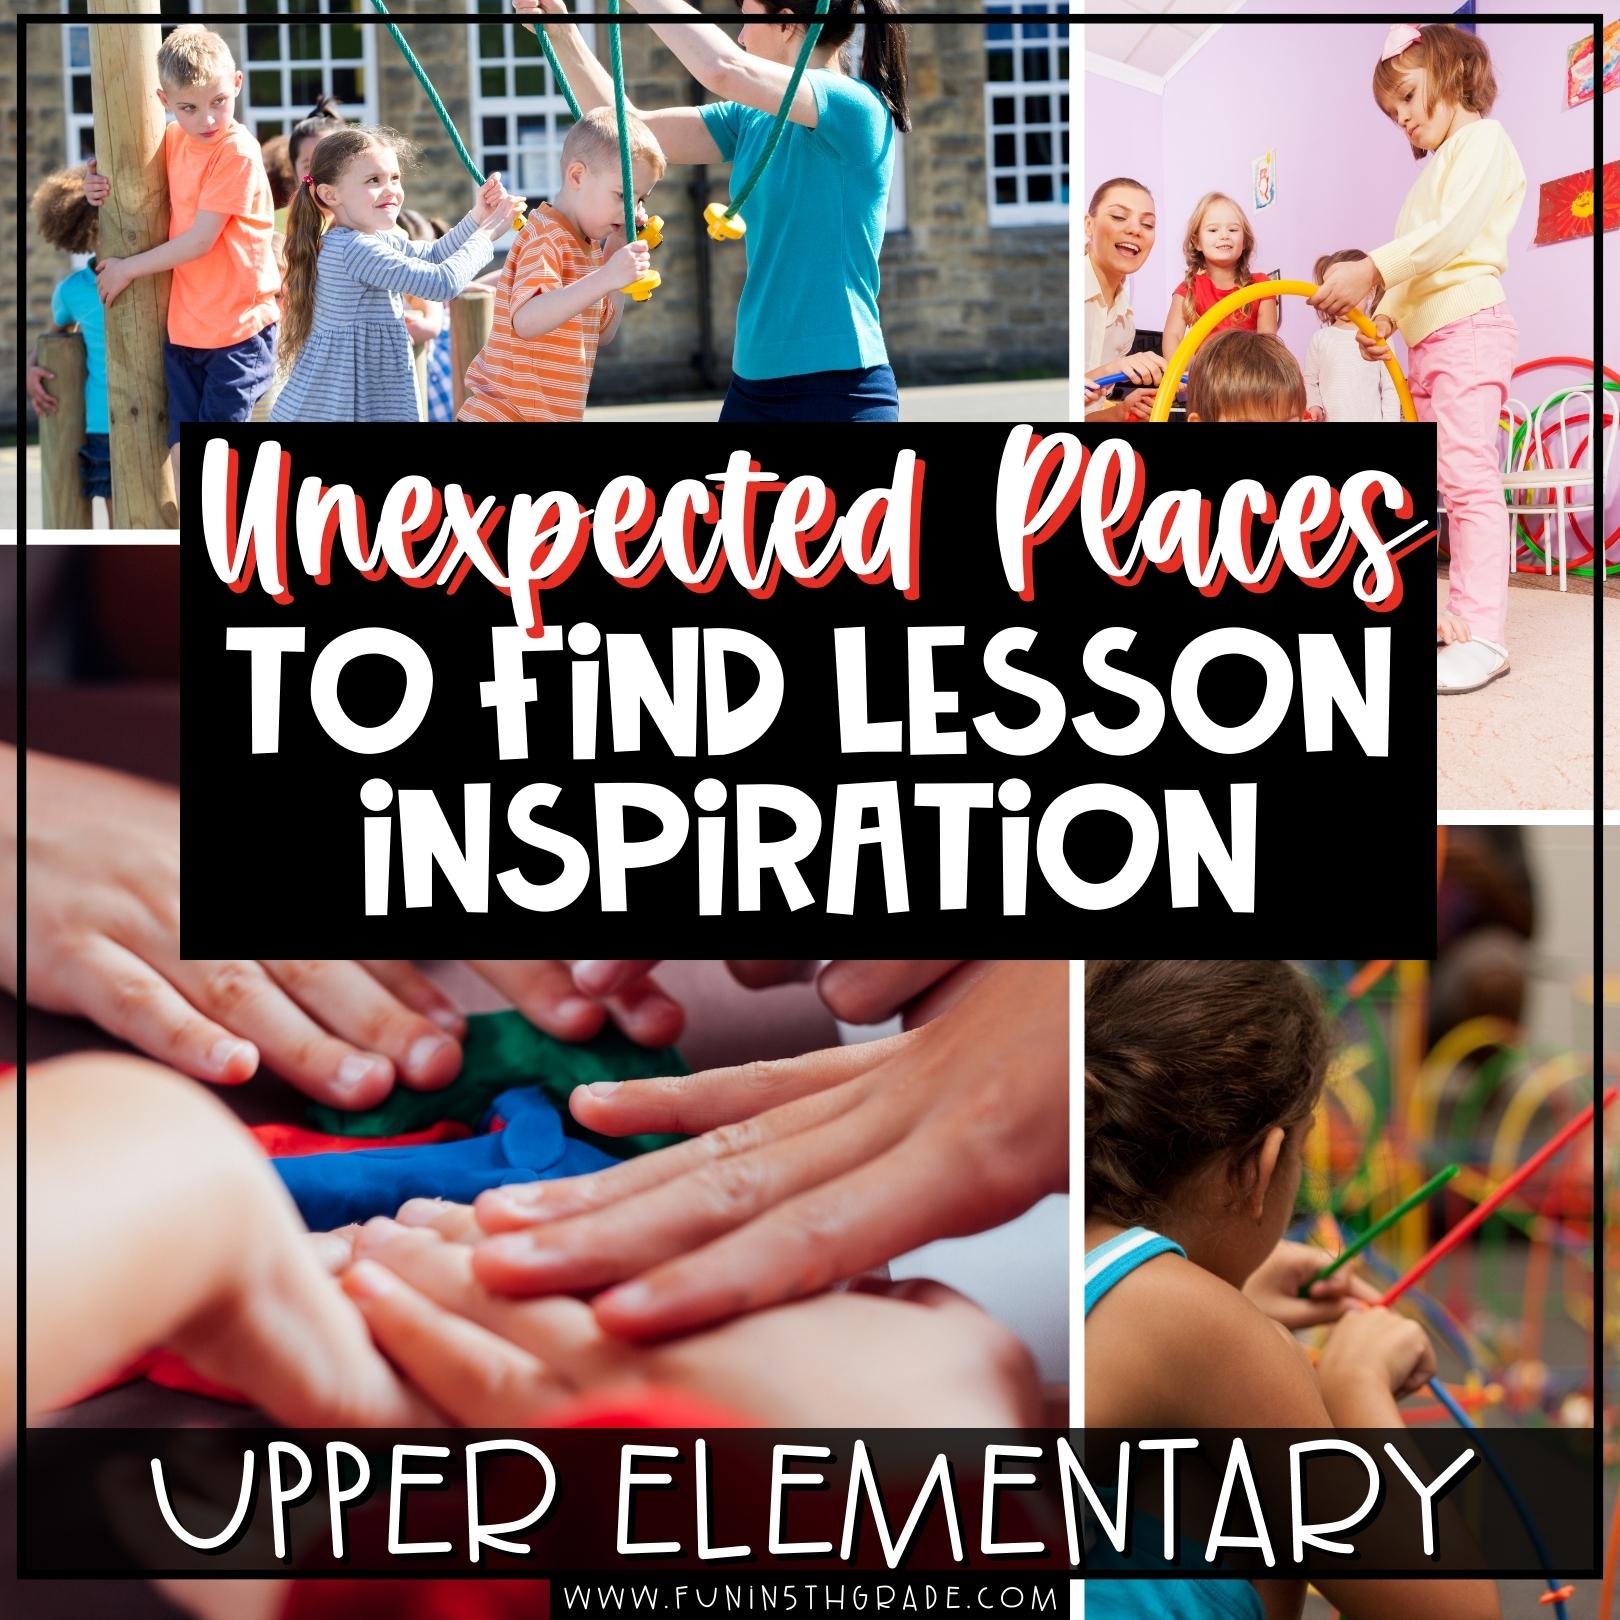 Unexpected places to find lesson inspiration feature image with four pictures: kids playing on the playground, kids playing with hula hoops, kids hands all together in a circle, and kids playing with something that looks like sticks